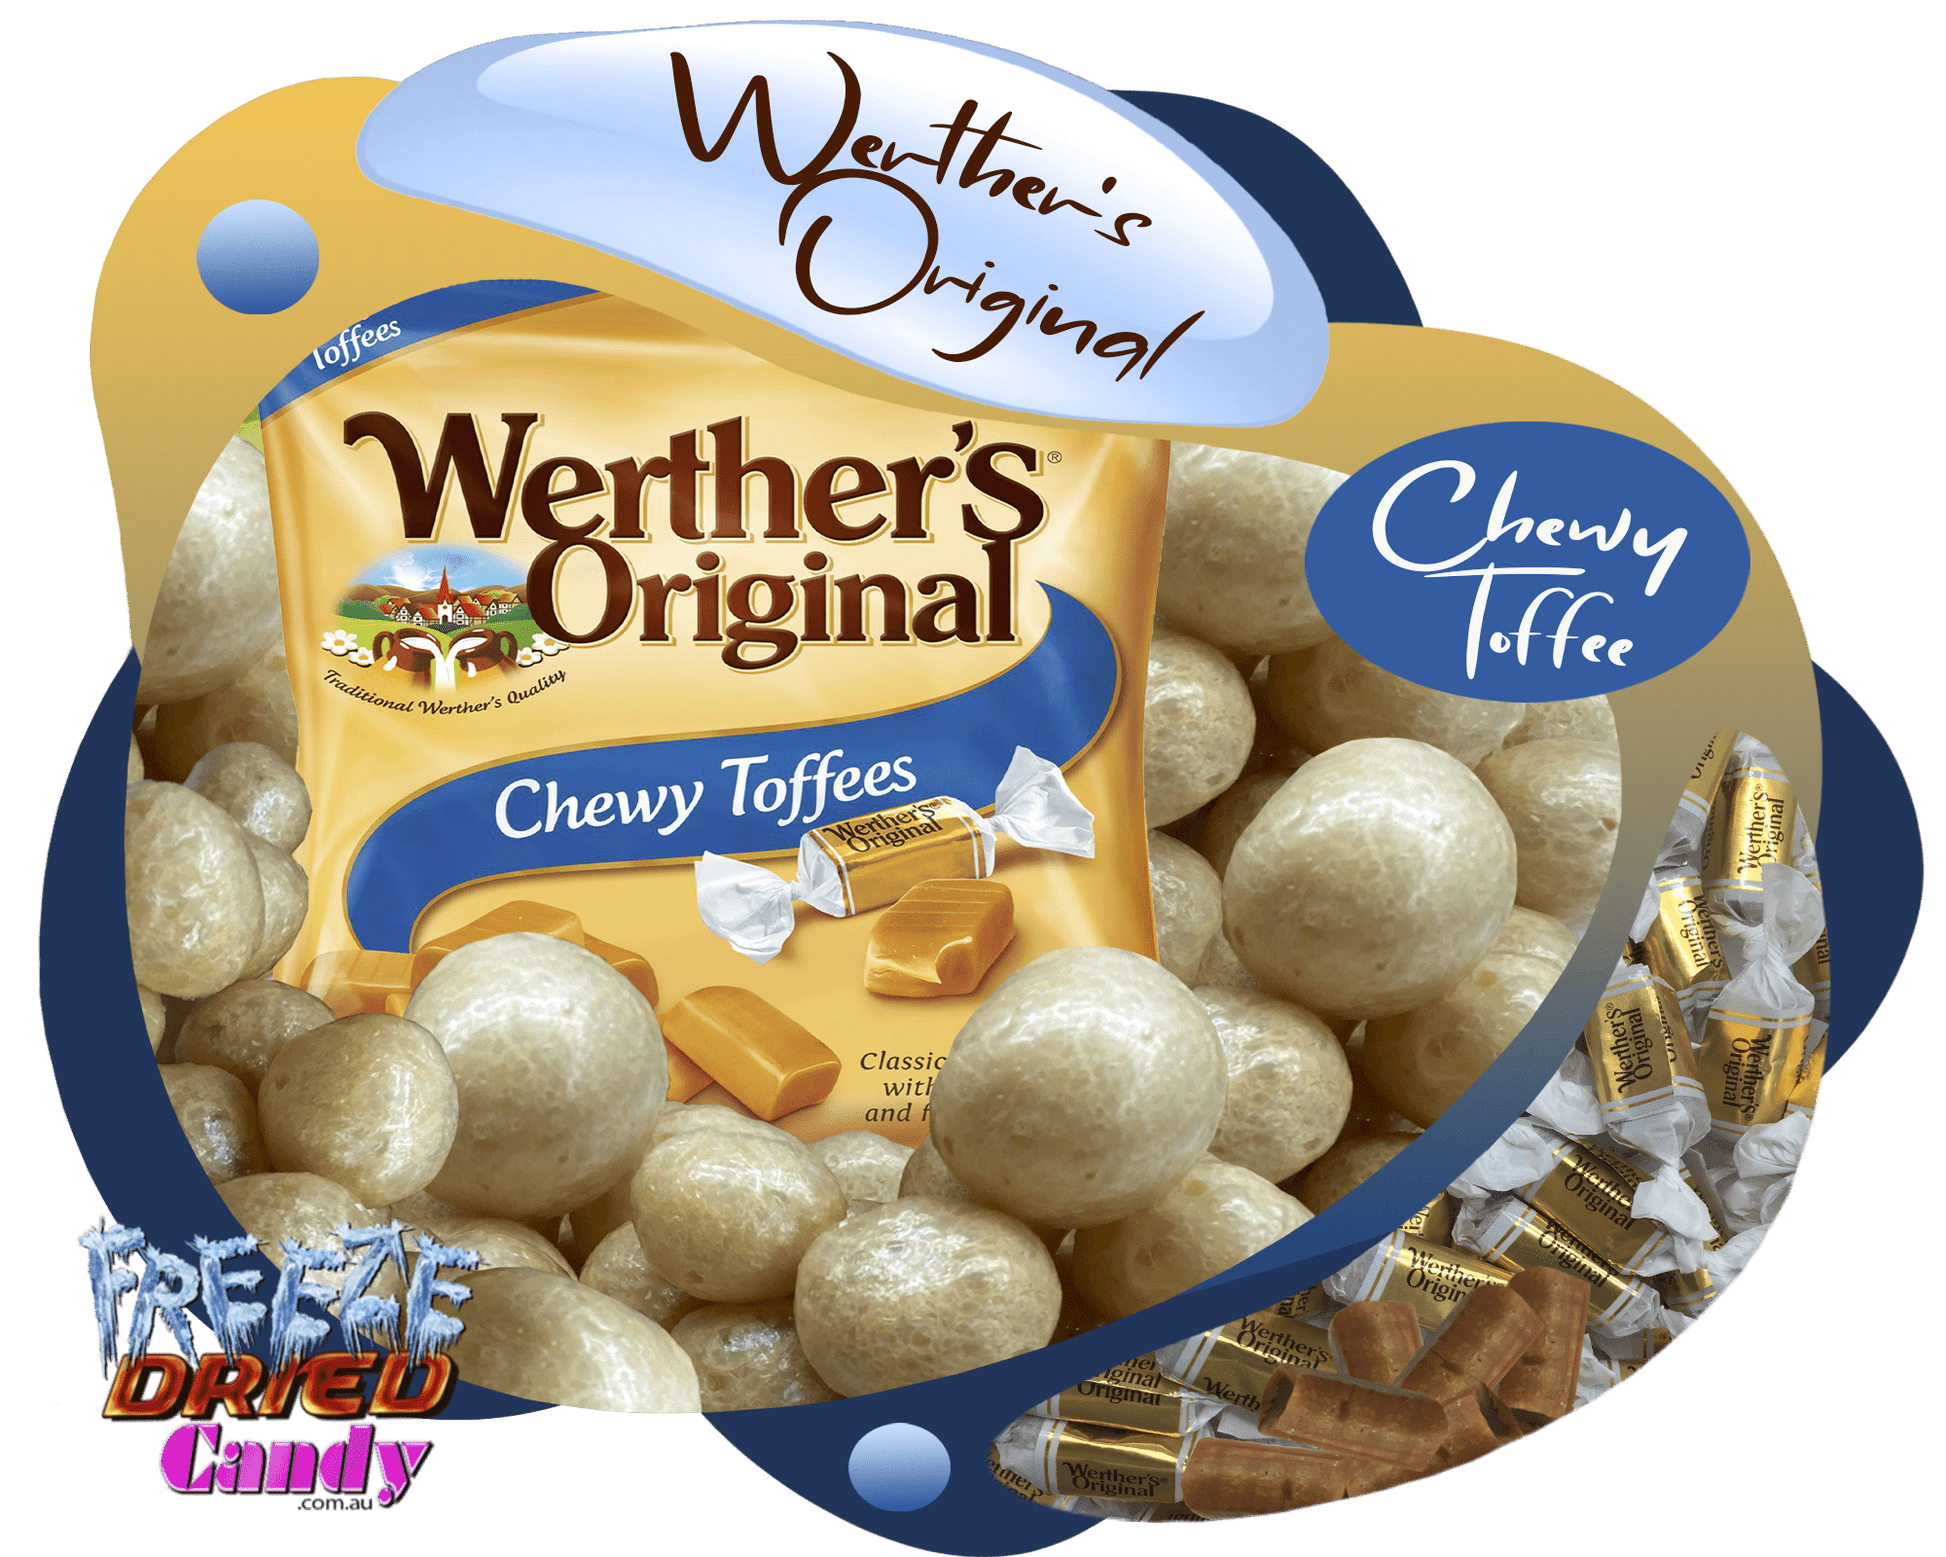 Freeze Dried Werther's Original Chewy Toffee - Freeze Dried Candy Lollies Sweets Treats Ice Cream